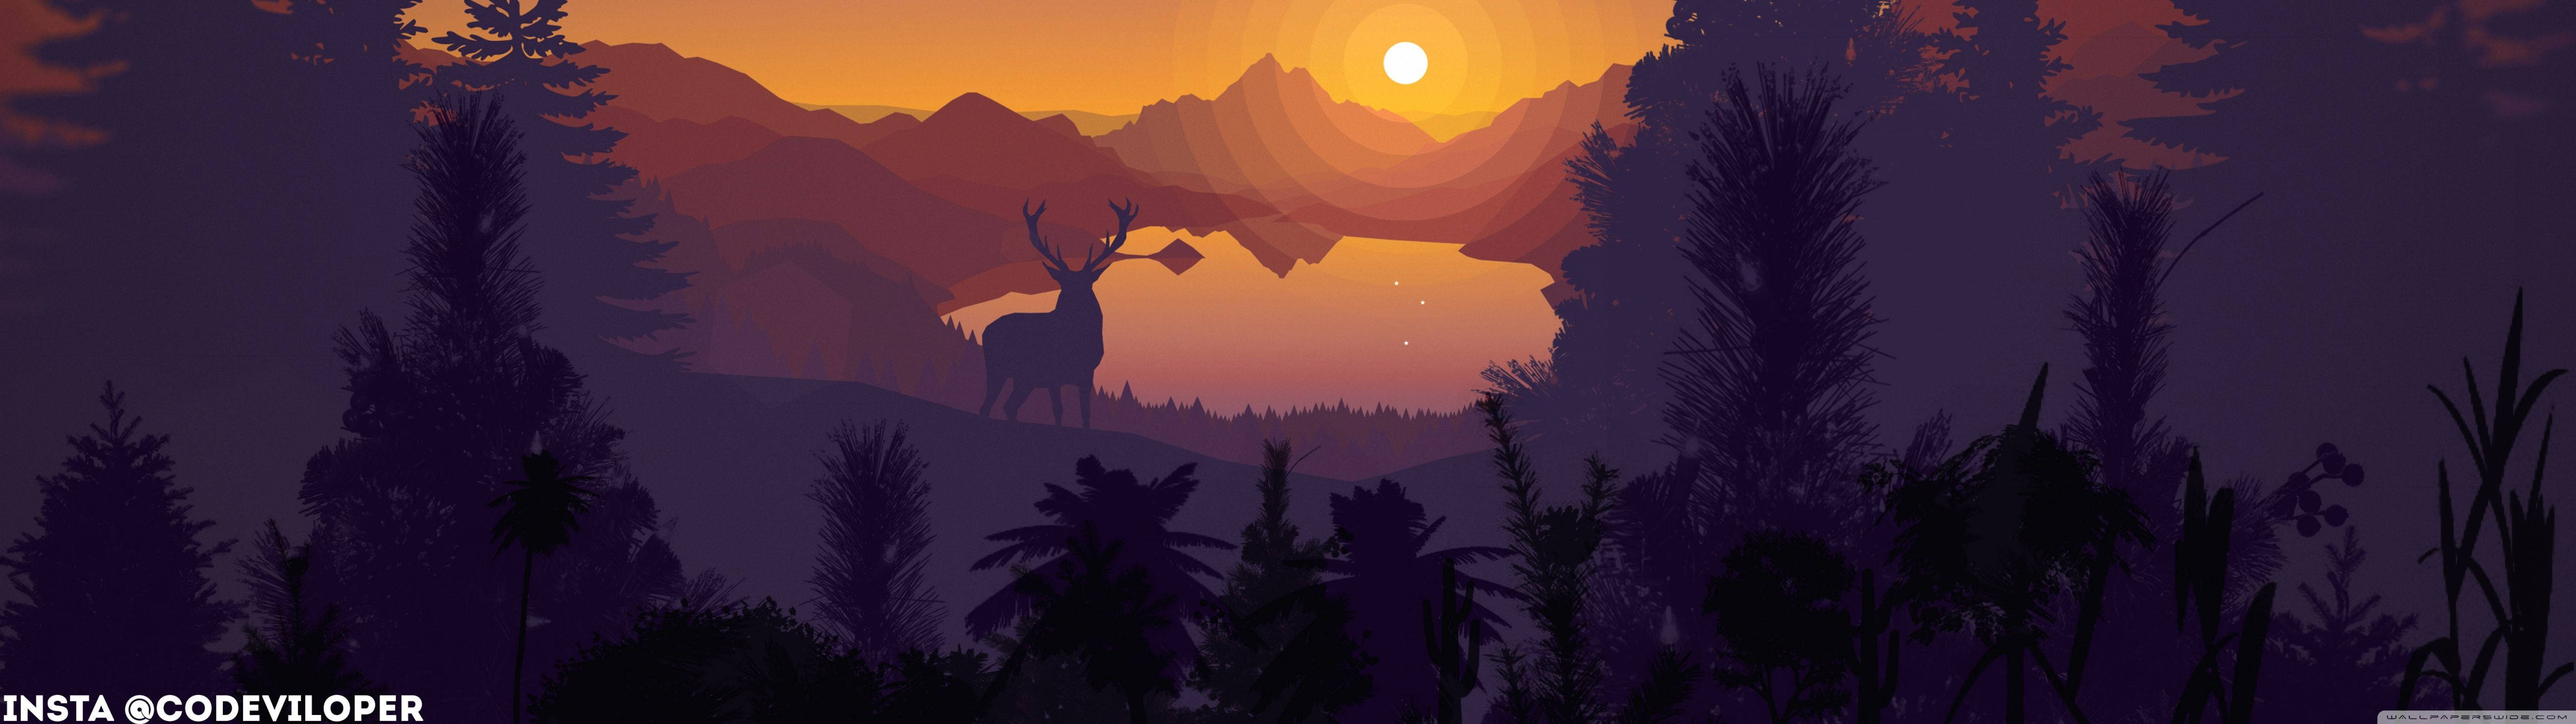 A deer in the forest at sunset wallpaper - 5120x1440